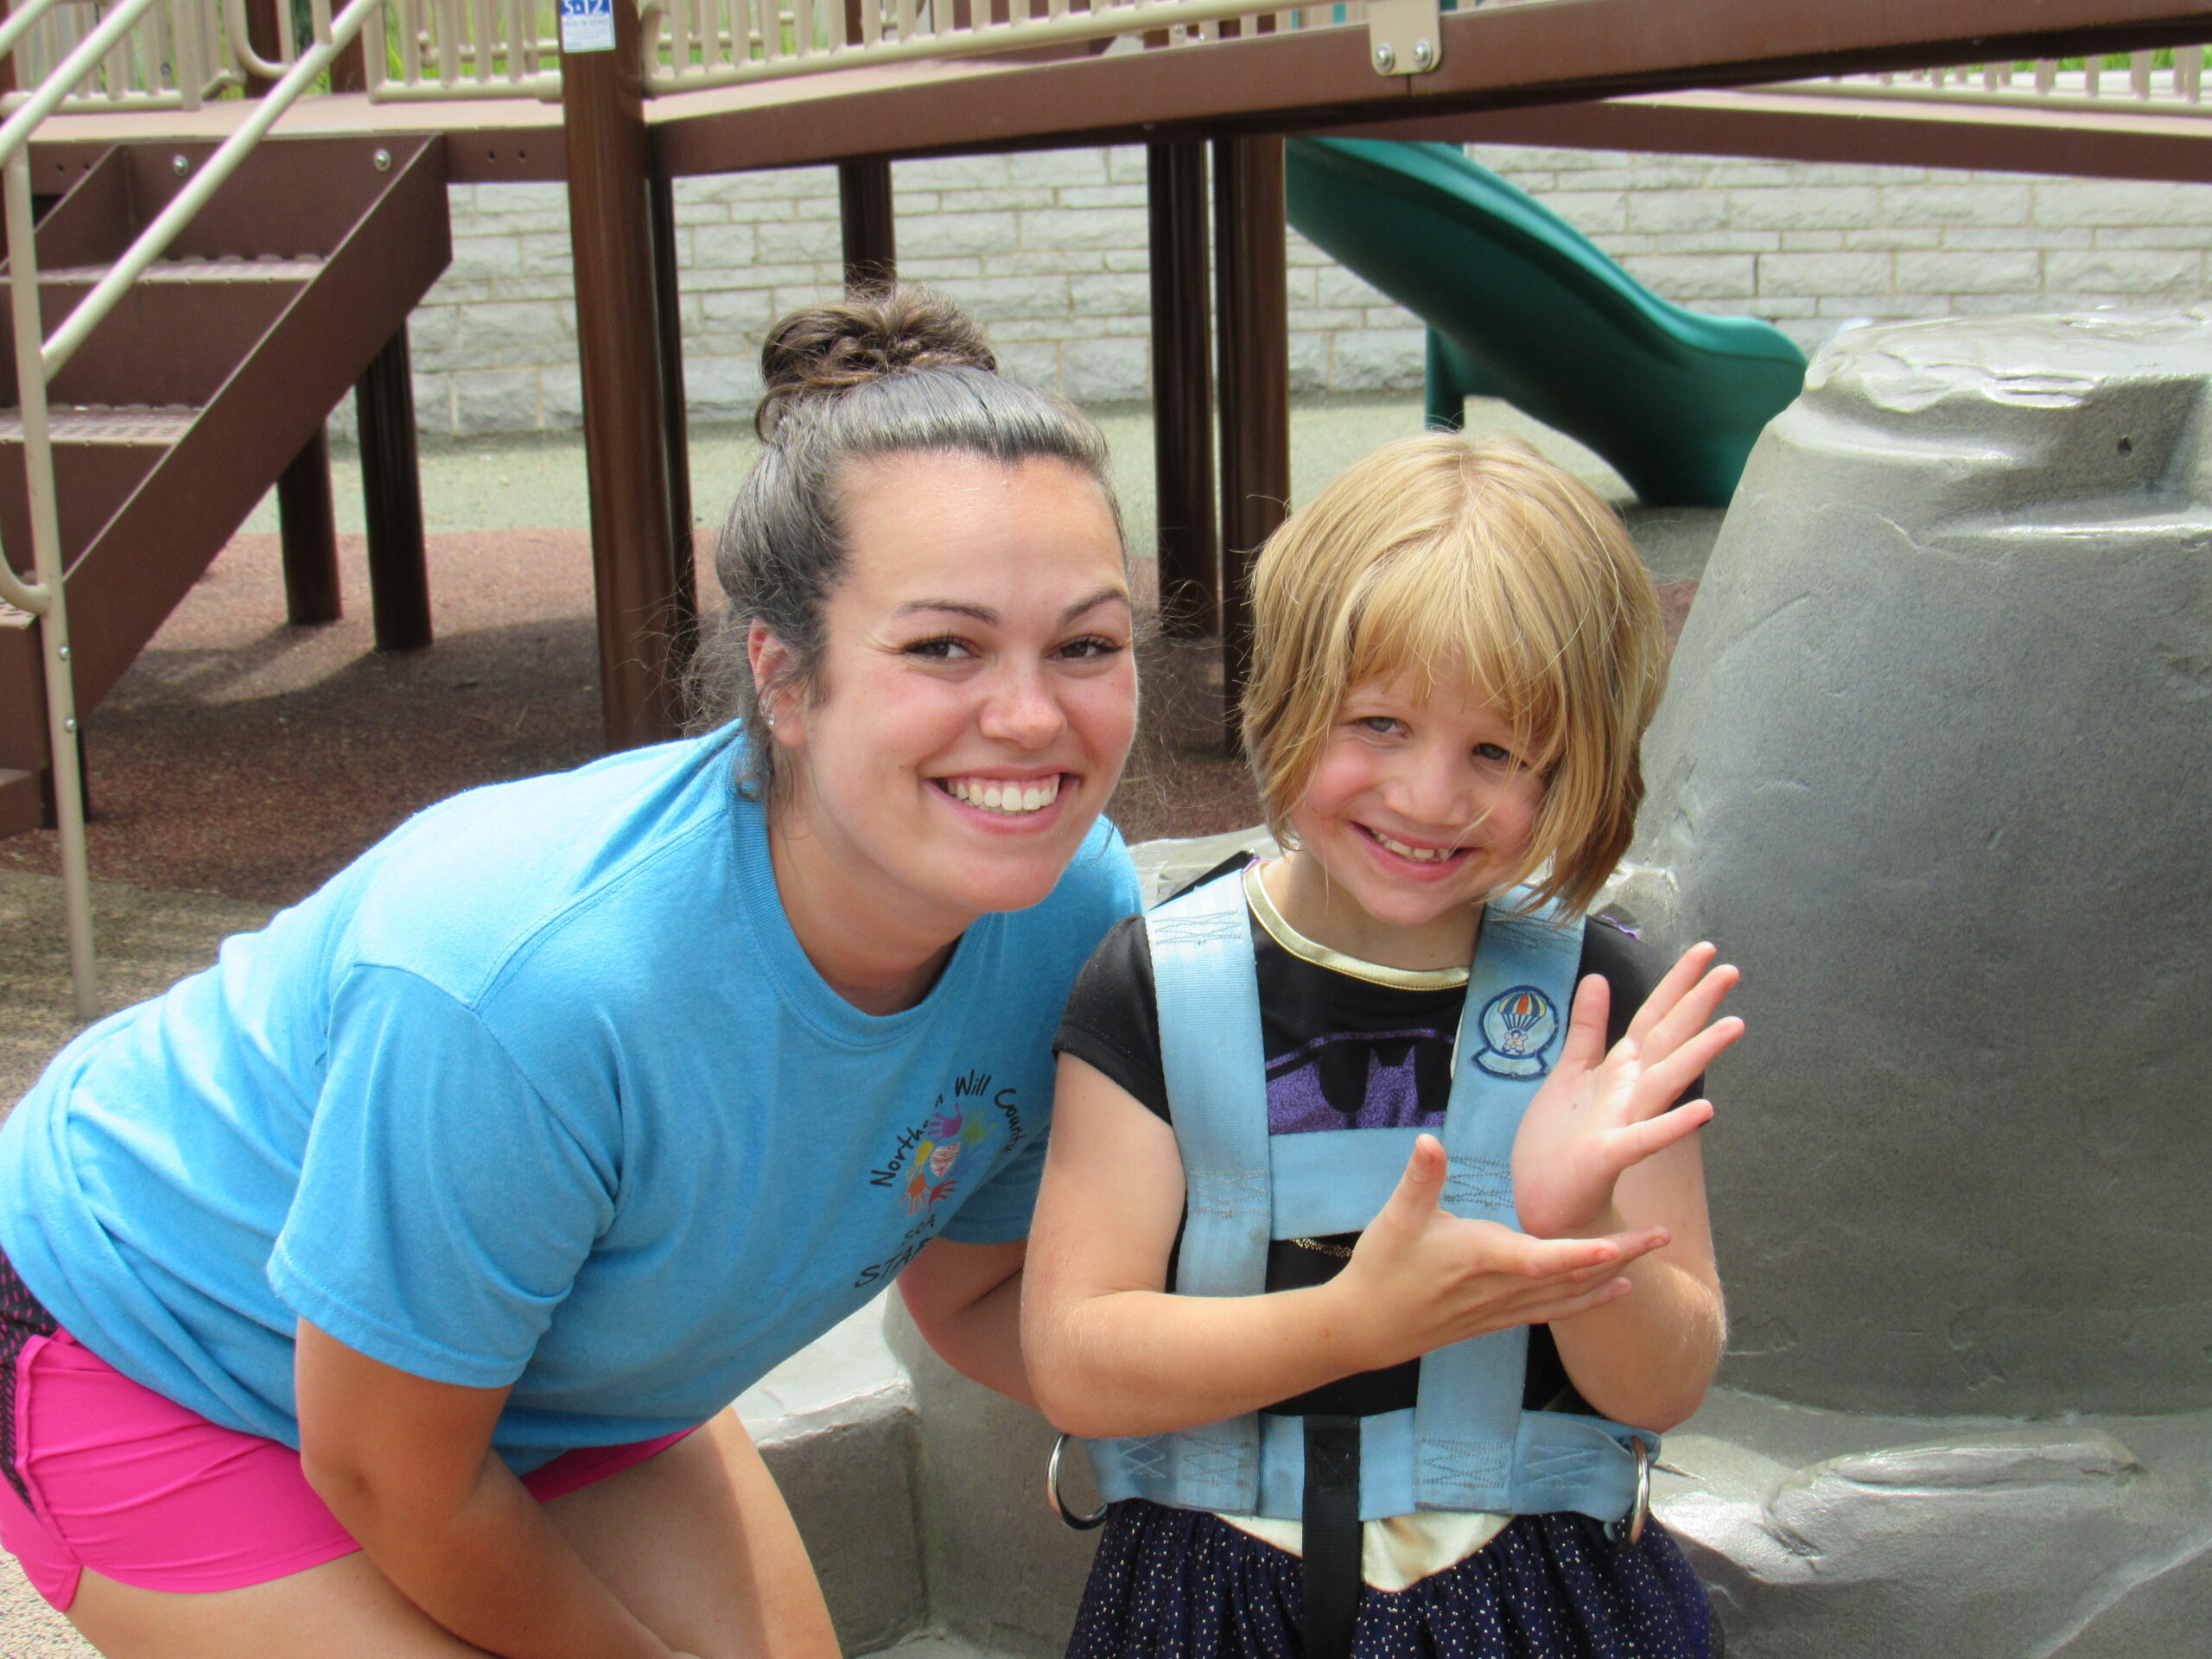 A woman and a girl stand together and smile while posing for the picture. They are at a playground and there are plastic climbable rocks and a jungle gym directly behind them.